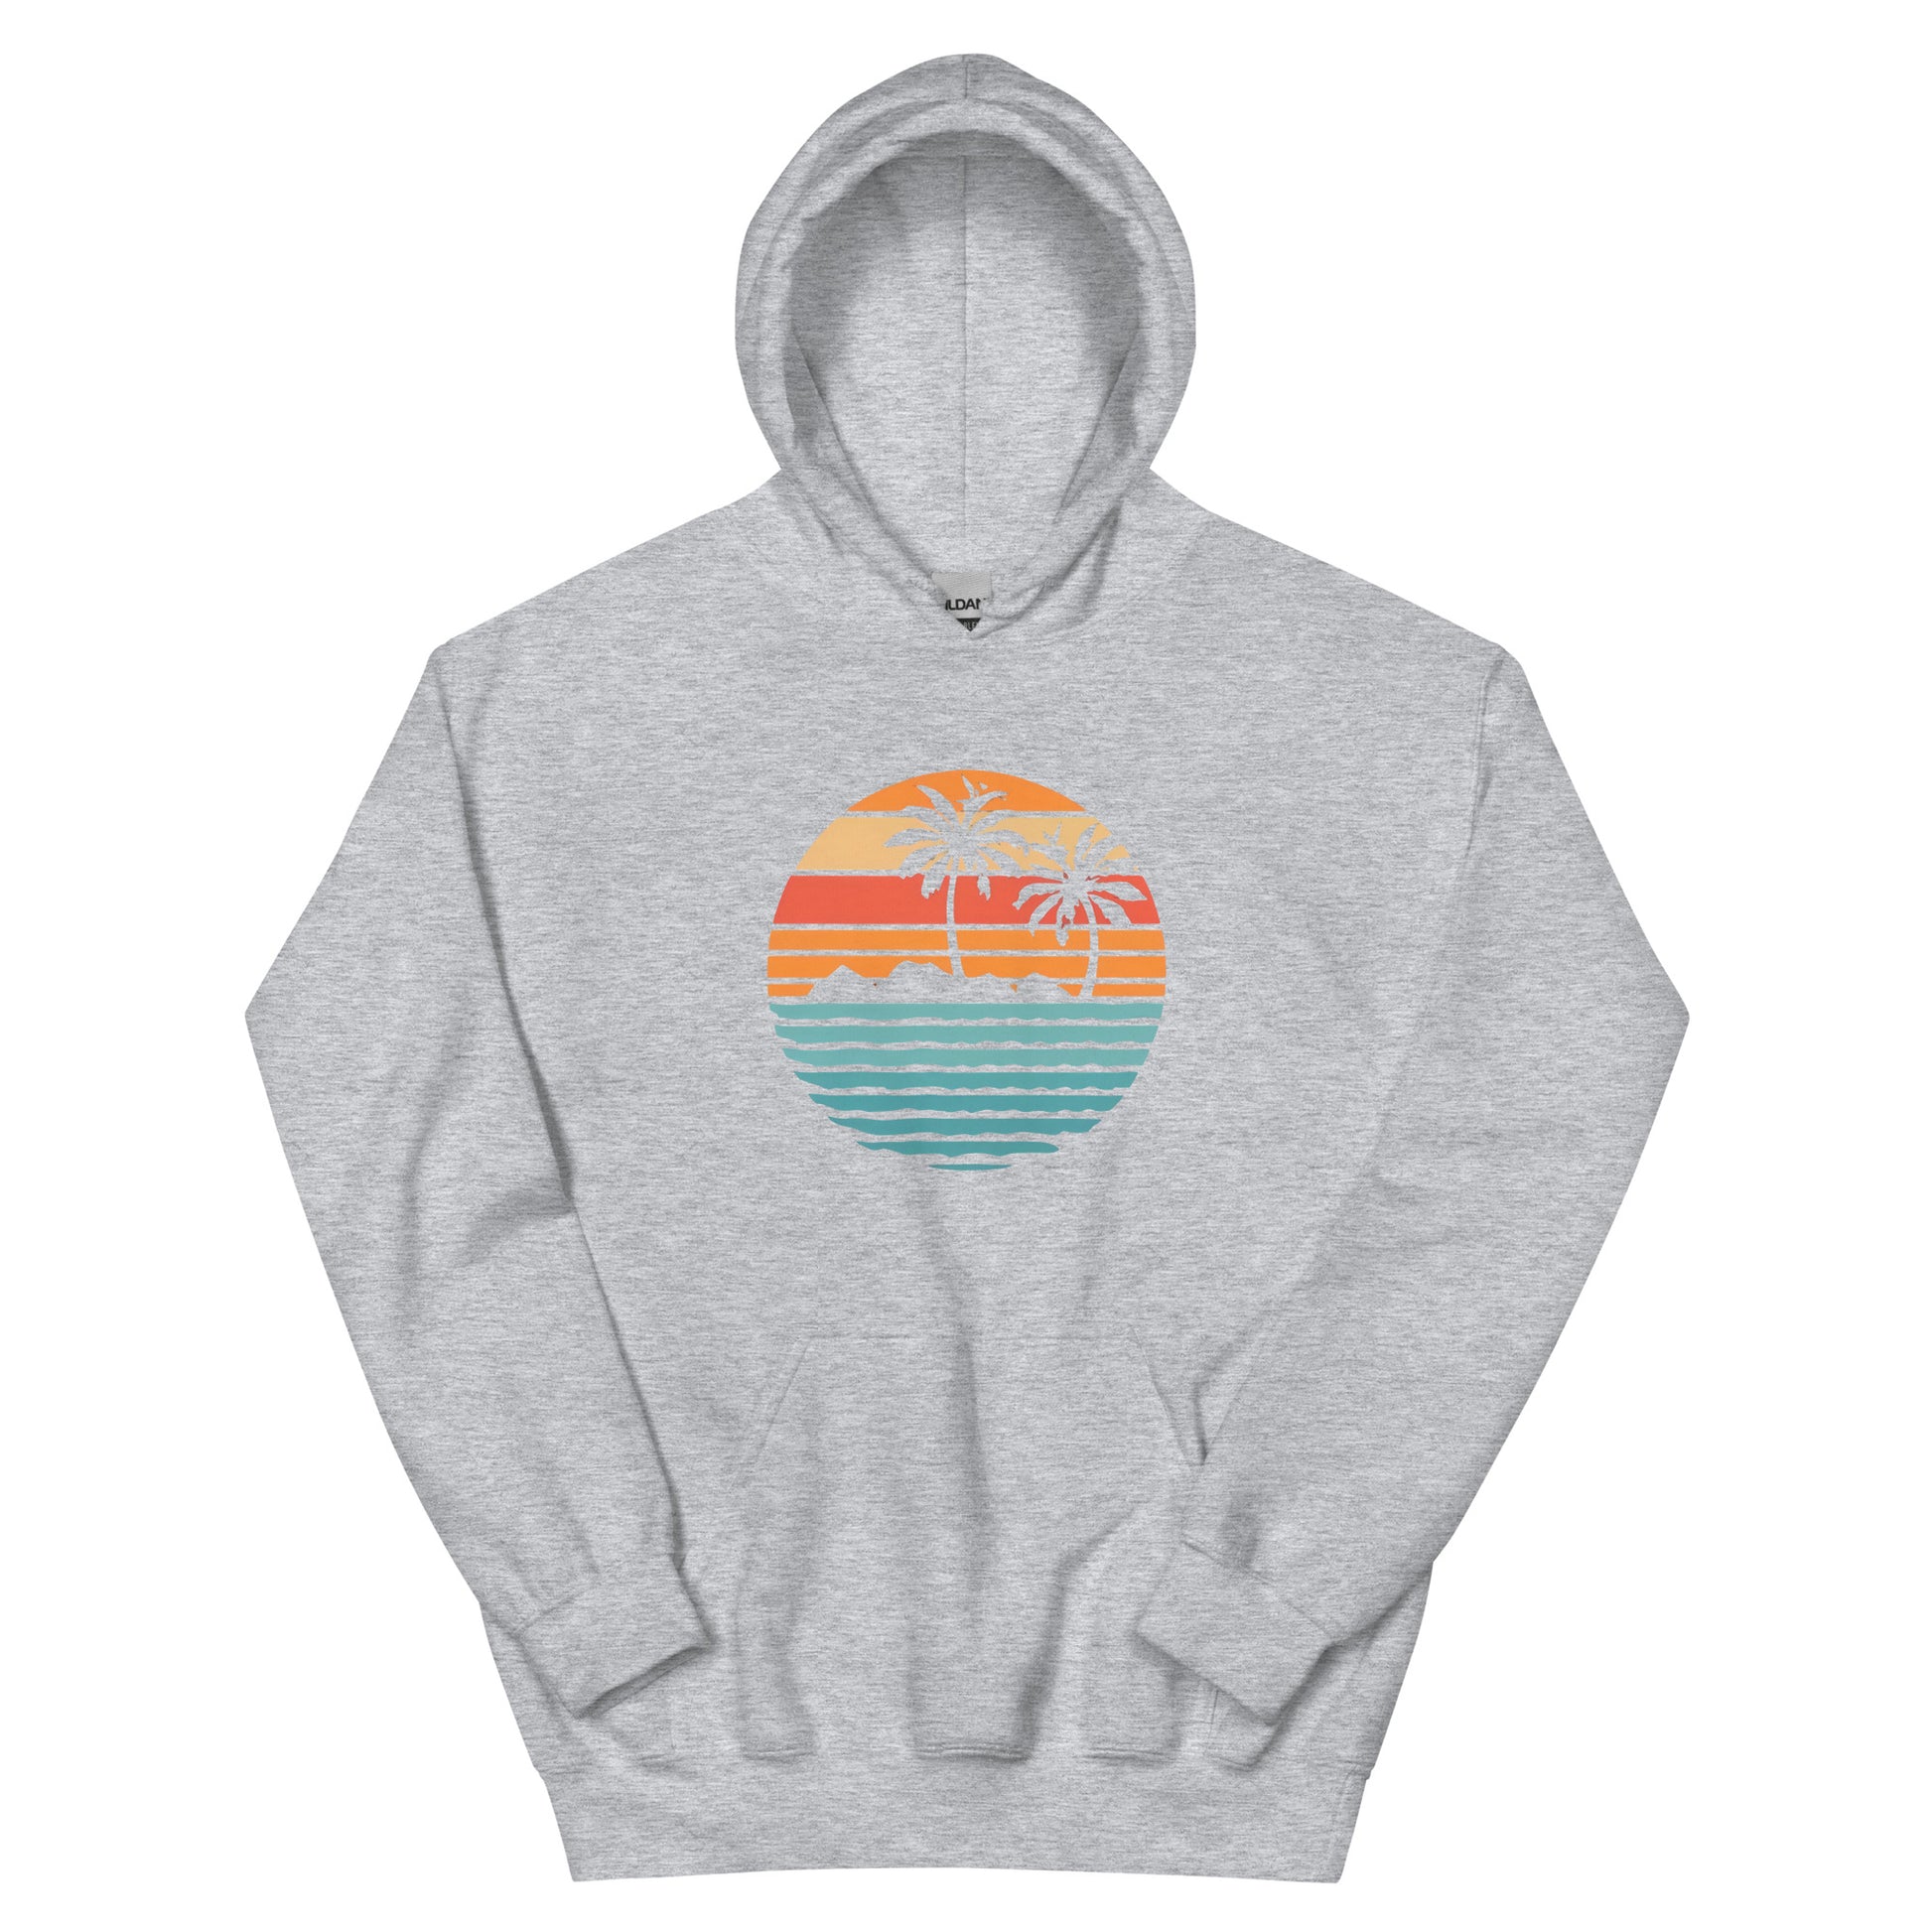 Sport grey Hoodie and a print of retro island